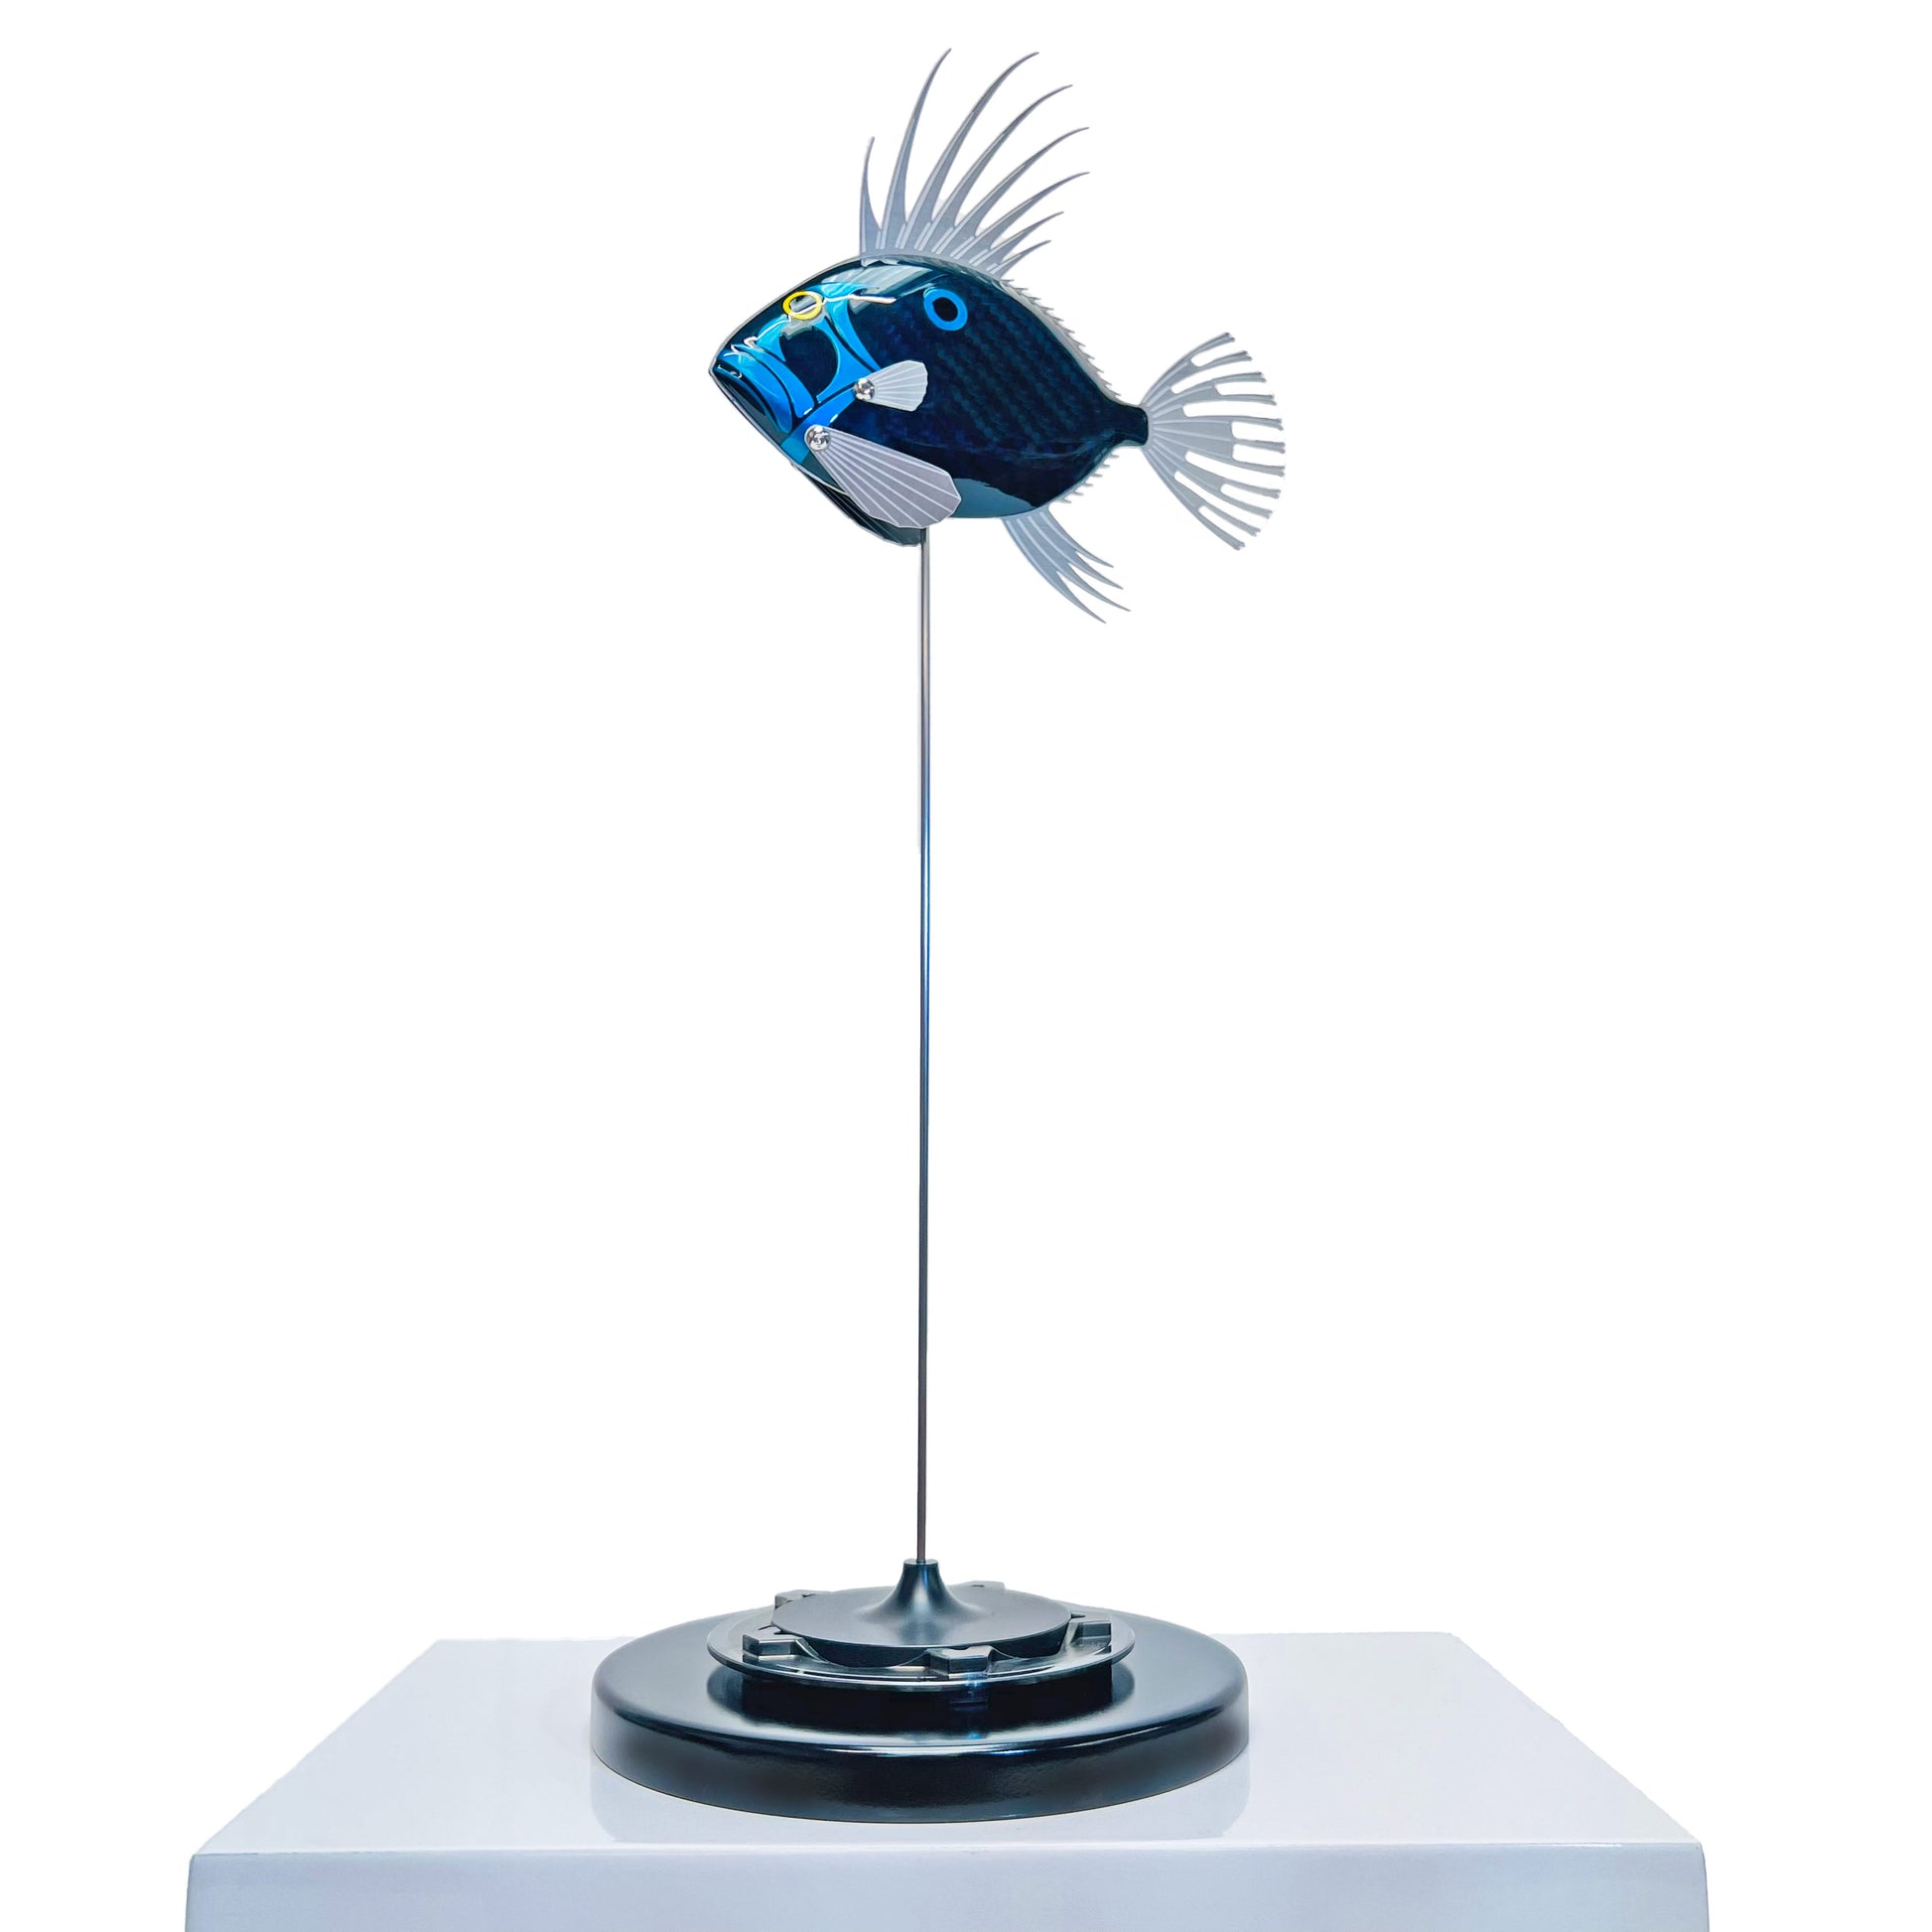 Carbon fibre baby dory sculpture with blue tint on a black base